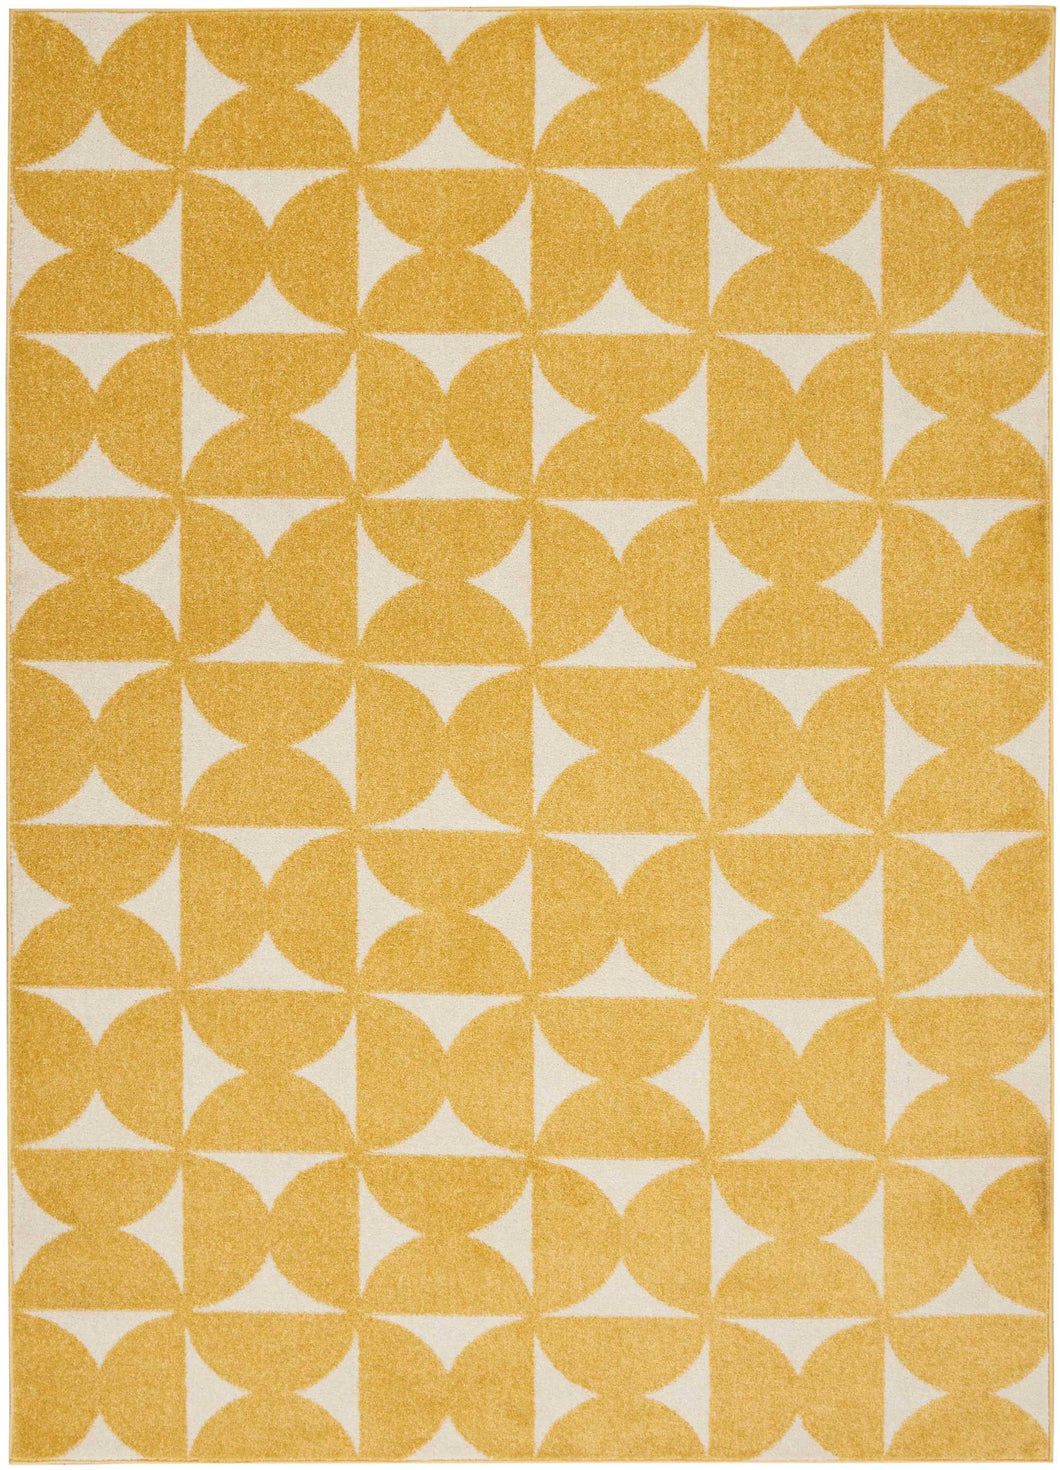 Nourison Harper DS301 Yellow 5'x7' Area Rug DS301 Yellow